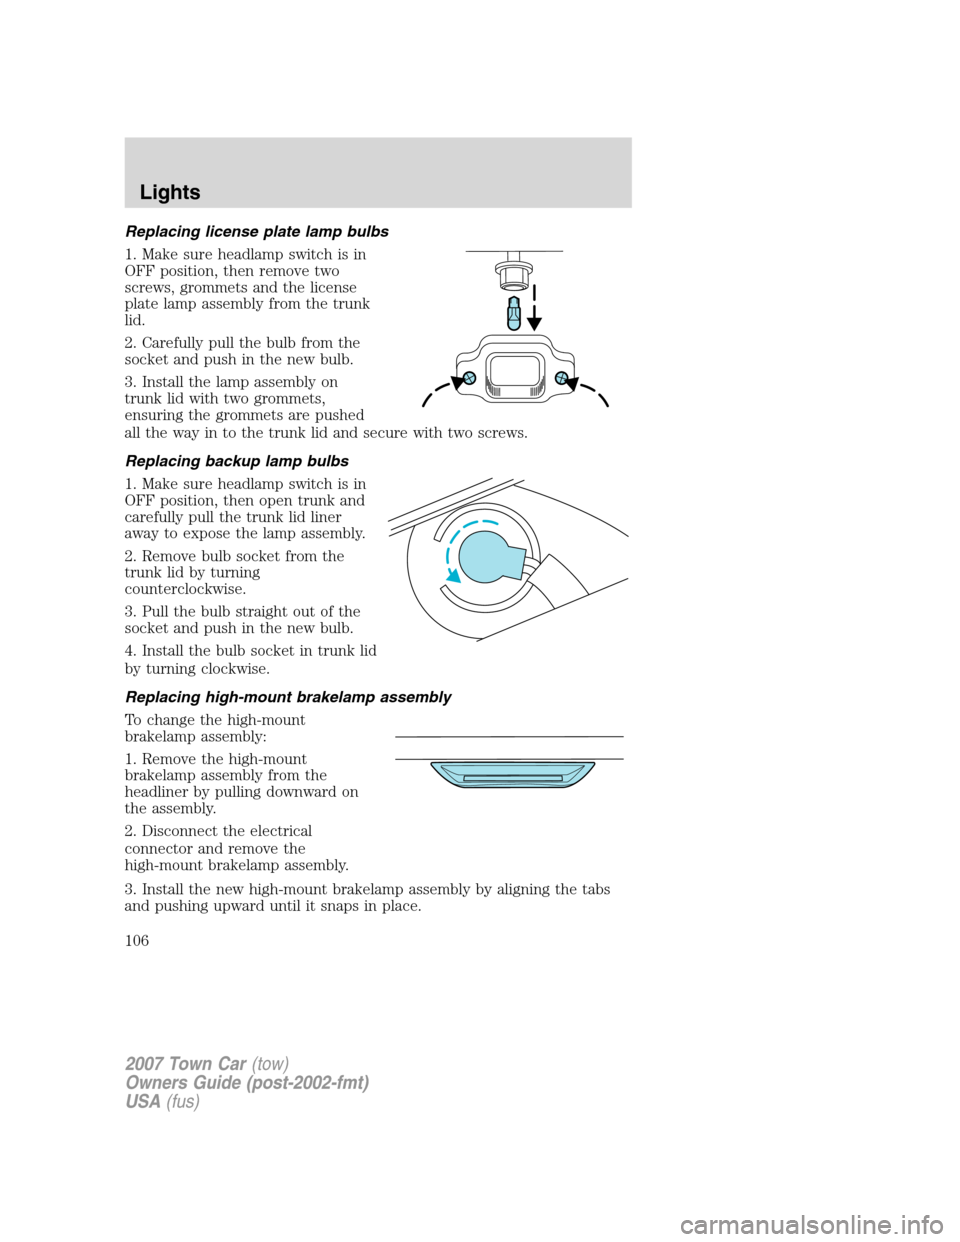 LINCOLN TOWN CAR 2007  Owners Manual Replacing license plate lamp bulbs
1. Make sure headlamp switch is in
OFF position, then remove two
screws, grommets and the license
plate lamp assembly from the trunk
lid.
2. Carefully pull the bulb 